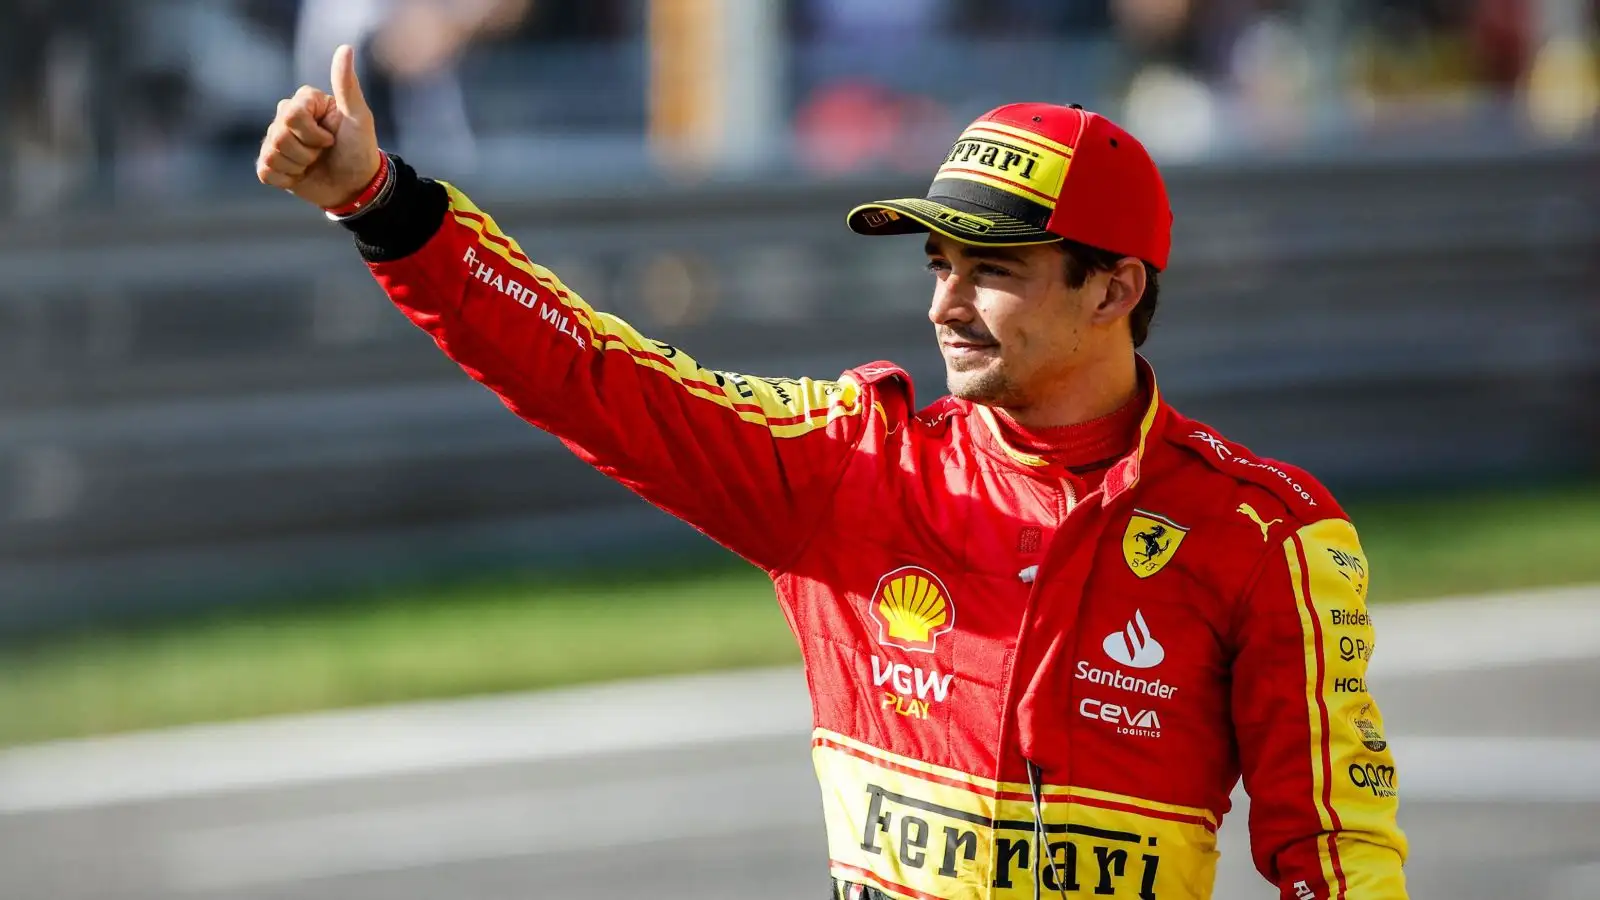 Ferrari driver Charles Leclerc waves to the crowd after qualifying third for the Italian Grand Prix at Monza.